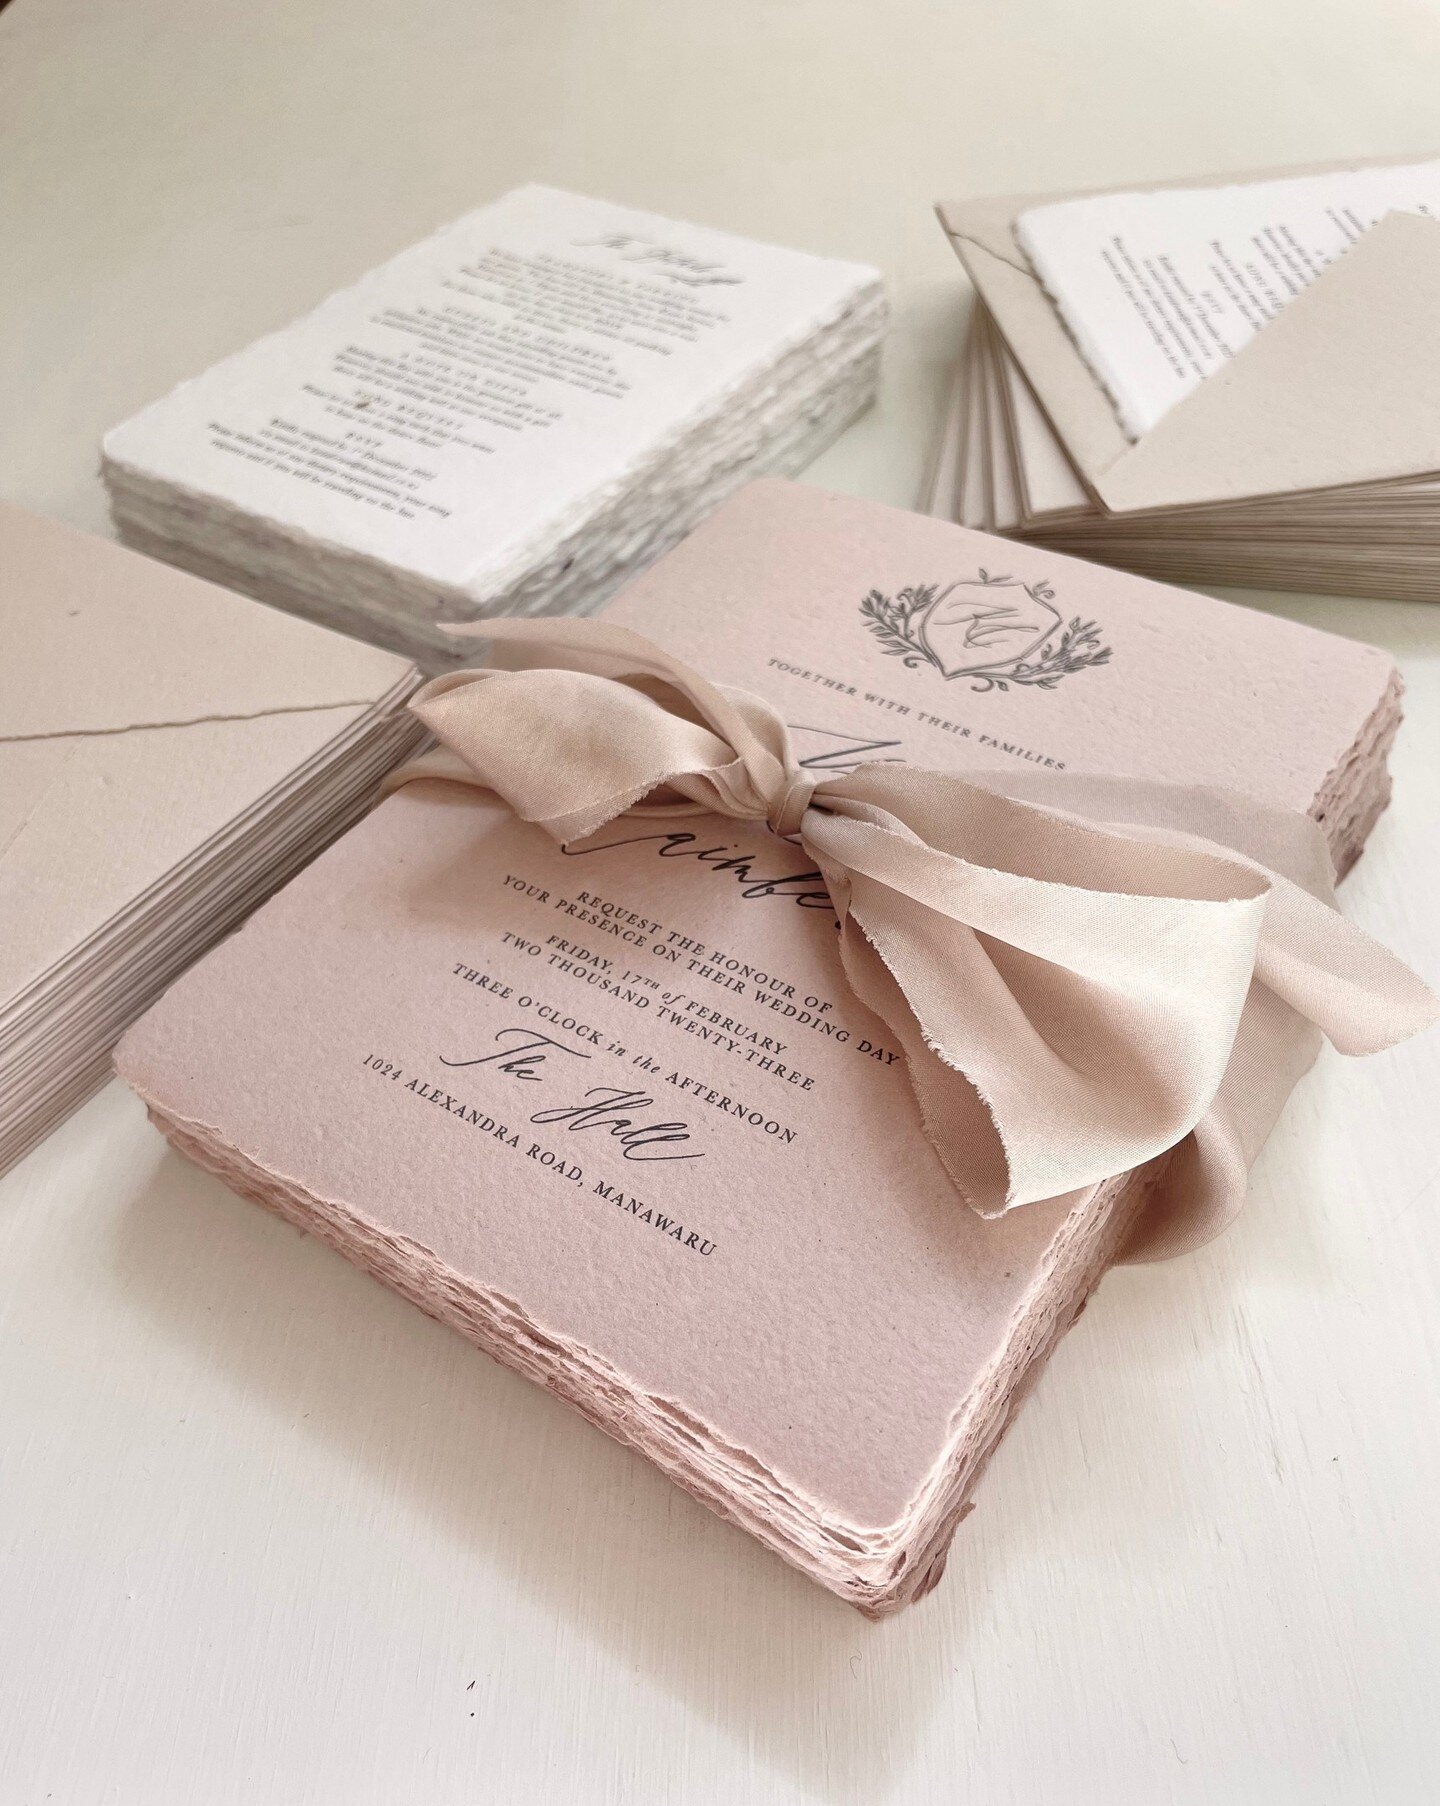 Gorgeous combo of handmade paper for K&amp;C x⁠
⁠
Absolutely loved designing this custom wedding stationery suite with you Kate!  I'm still dreaming about that hand drawn monogram crest and its delicate foliage wreath. ⁠
⁠
Would stationery in this st